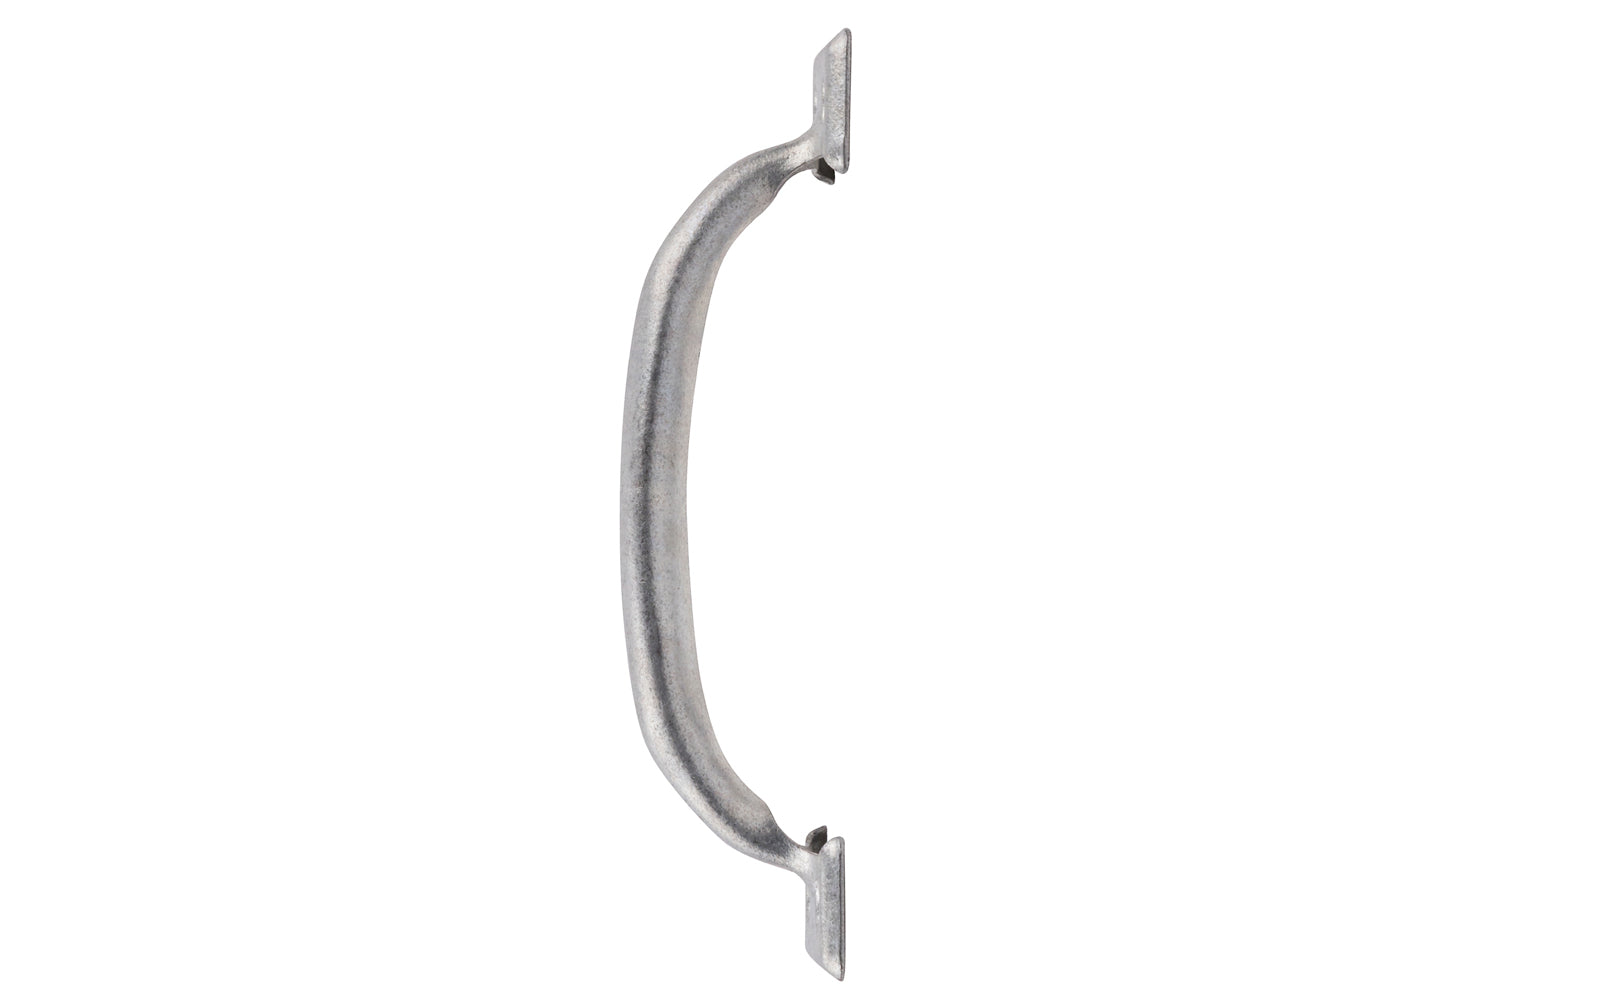 This galvanized coated utility pull is designed for general use on drawers, doors, & a variety of other applications. Includes fasteners. Made of steel material with galvanized finish. Available 5-3/4" overall size & 6-1/2" overall sizes.